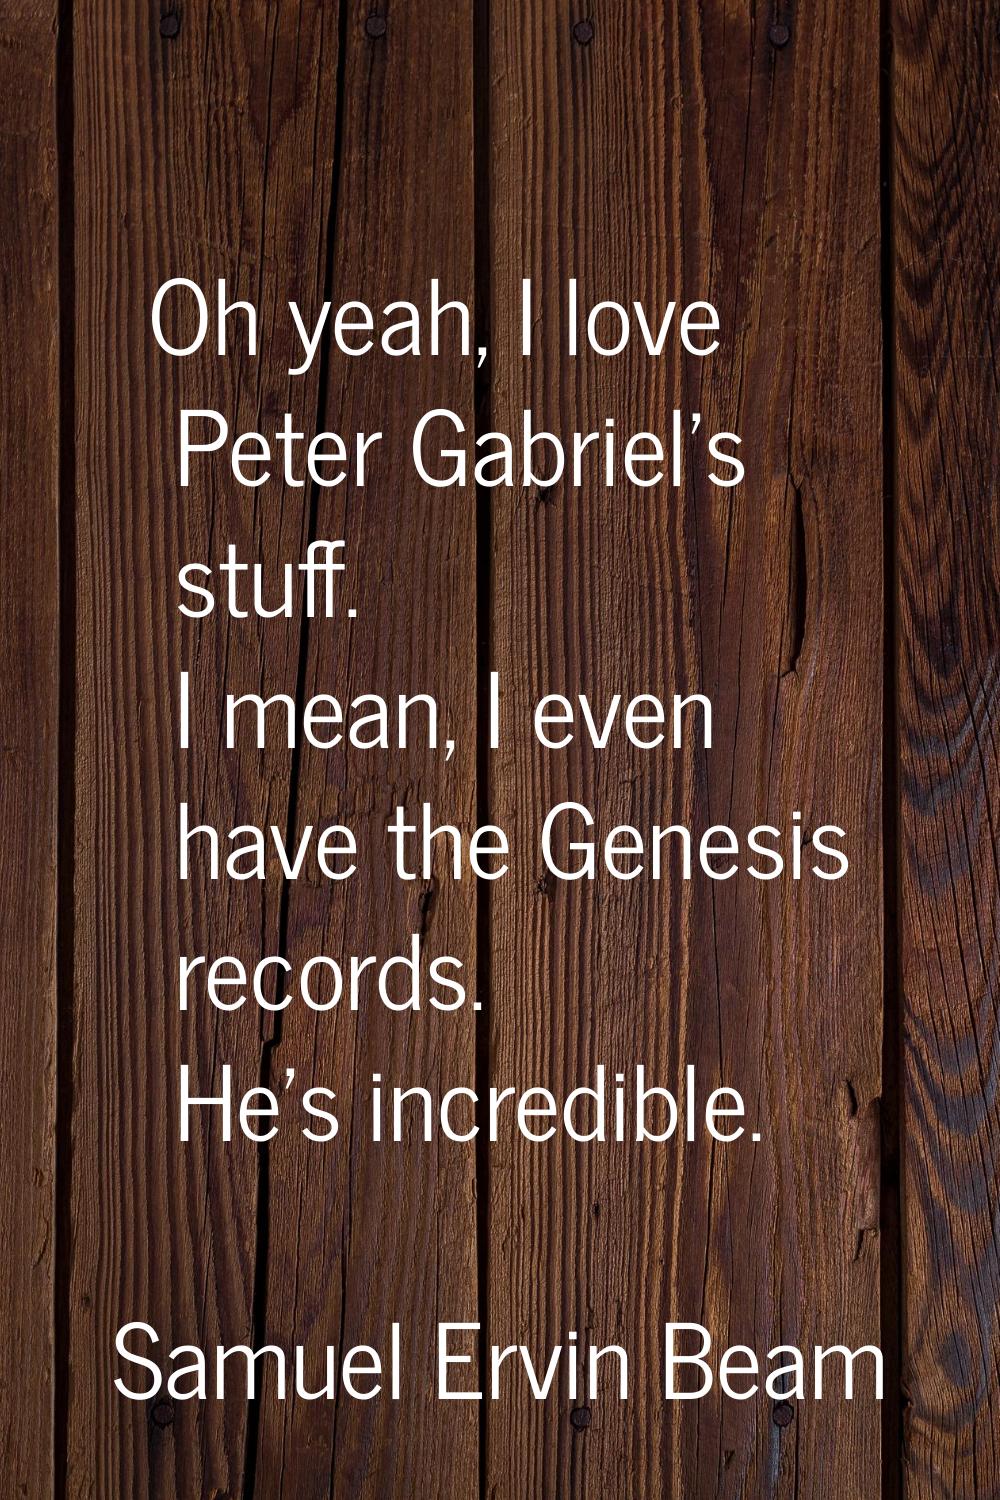 Oh yeah, I love Peter Gabriel's stuff. I mean, I even have the Genesis records. He's incredible.